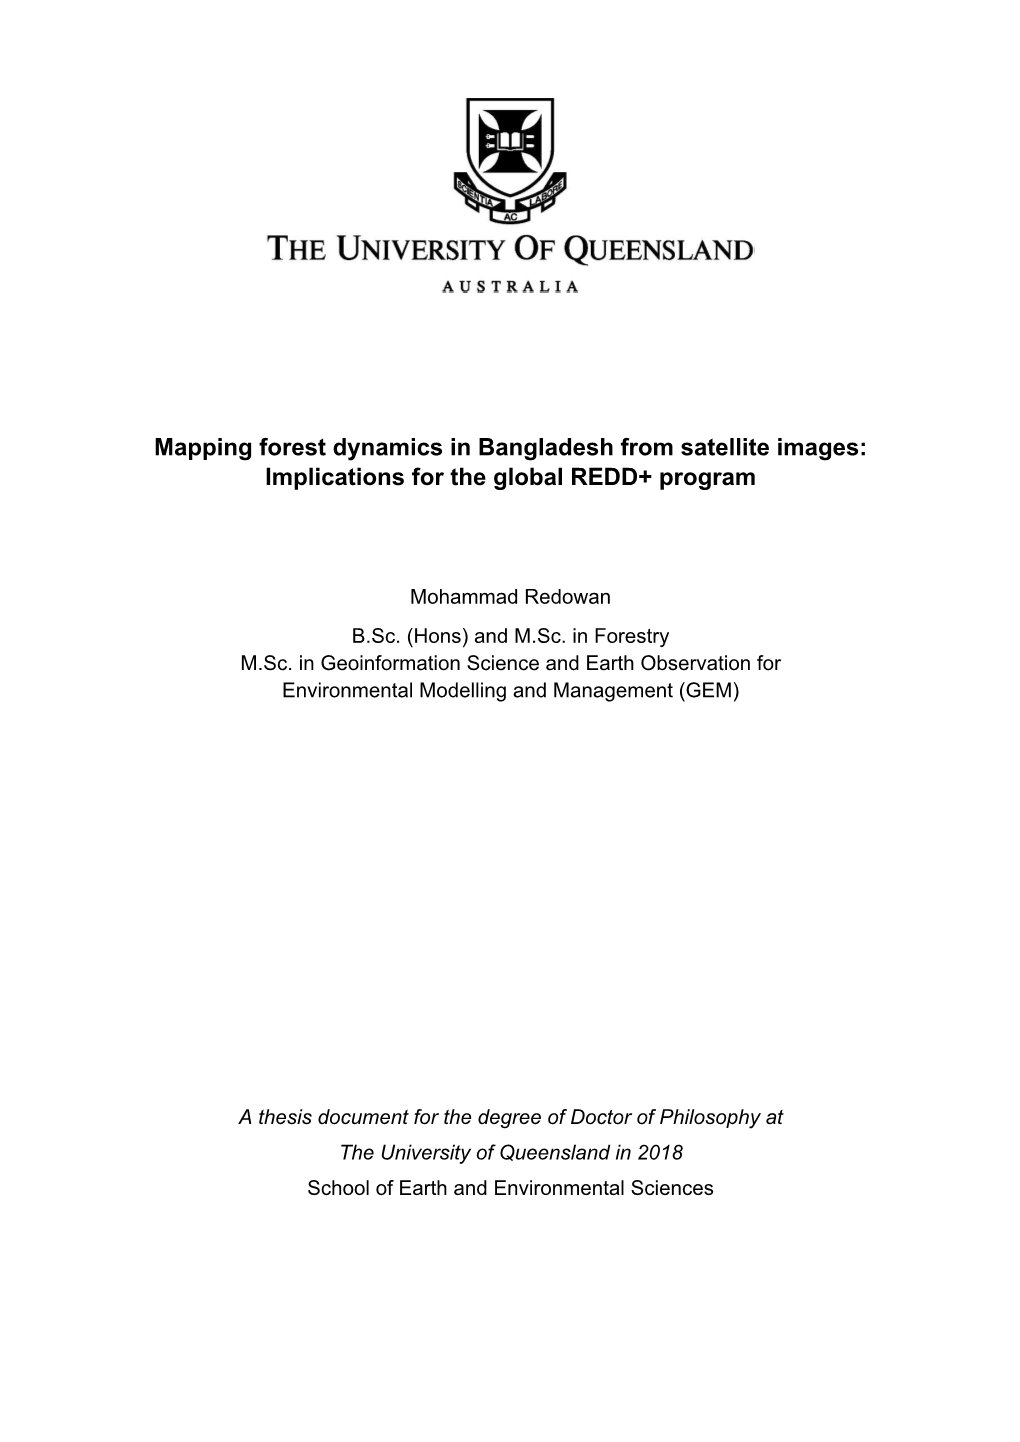 Mapping Forest Dynamics in Bangladesh from Satellite Images: Implications for the Global REDD+ Program